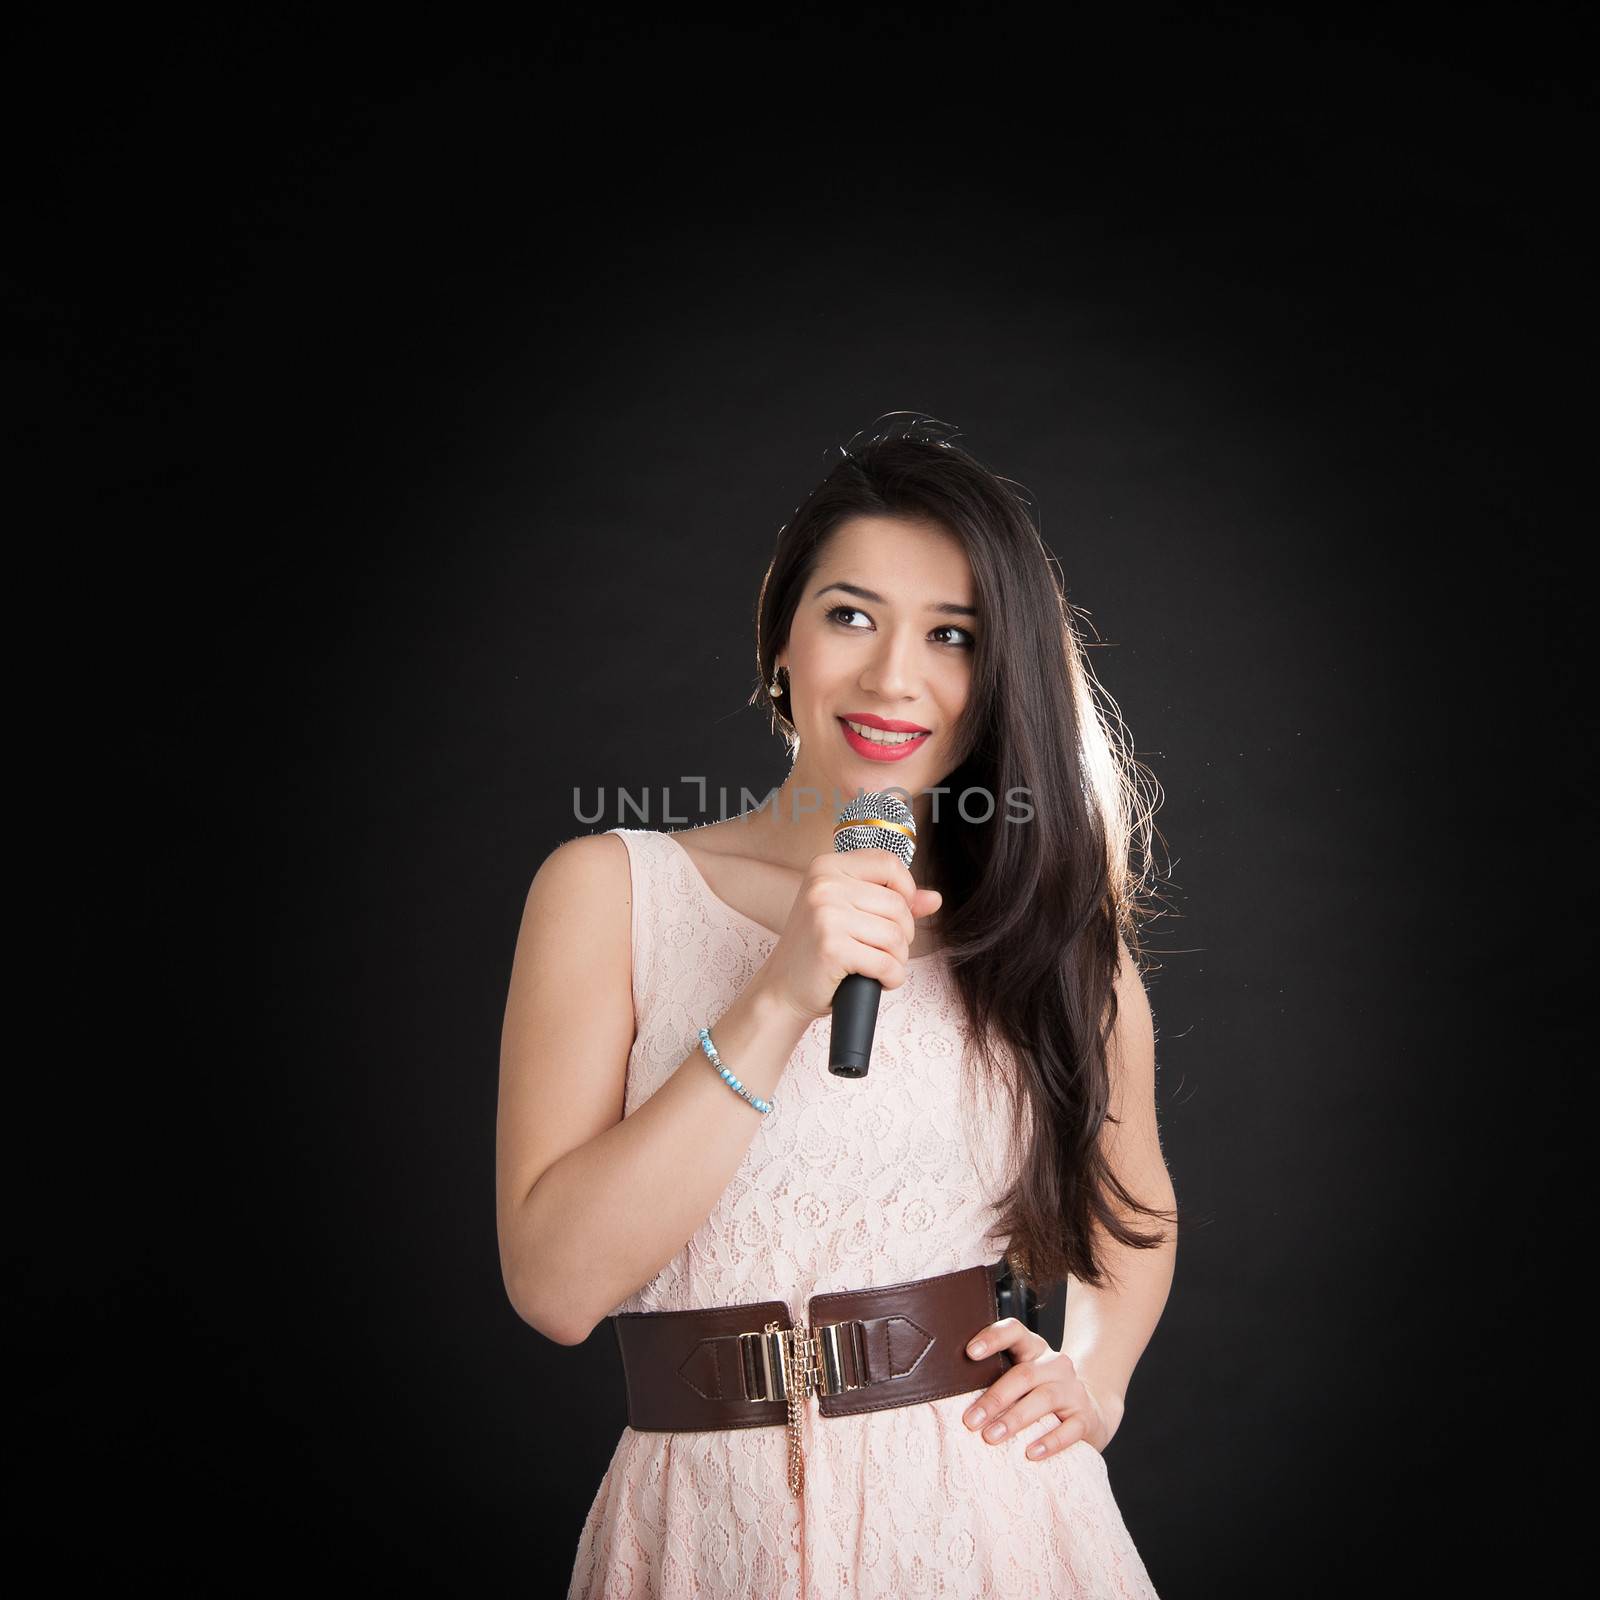 beautiful singer on a black background with a microphone